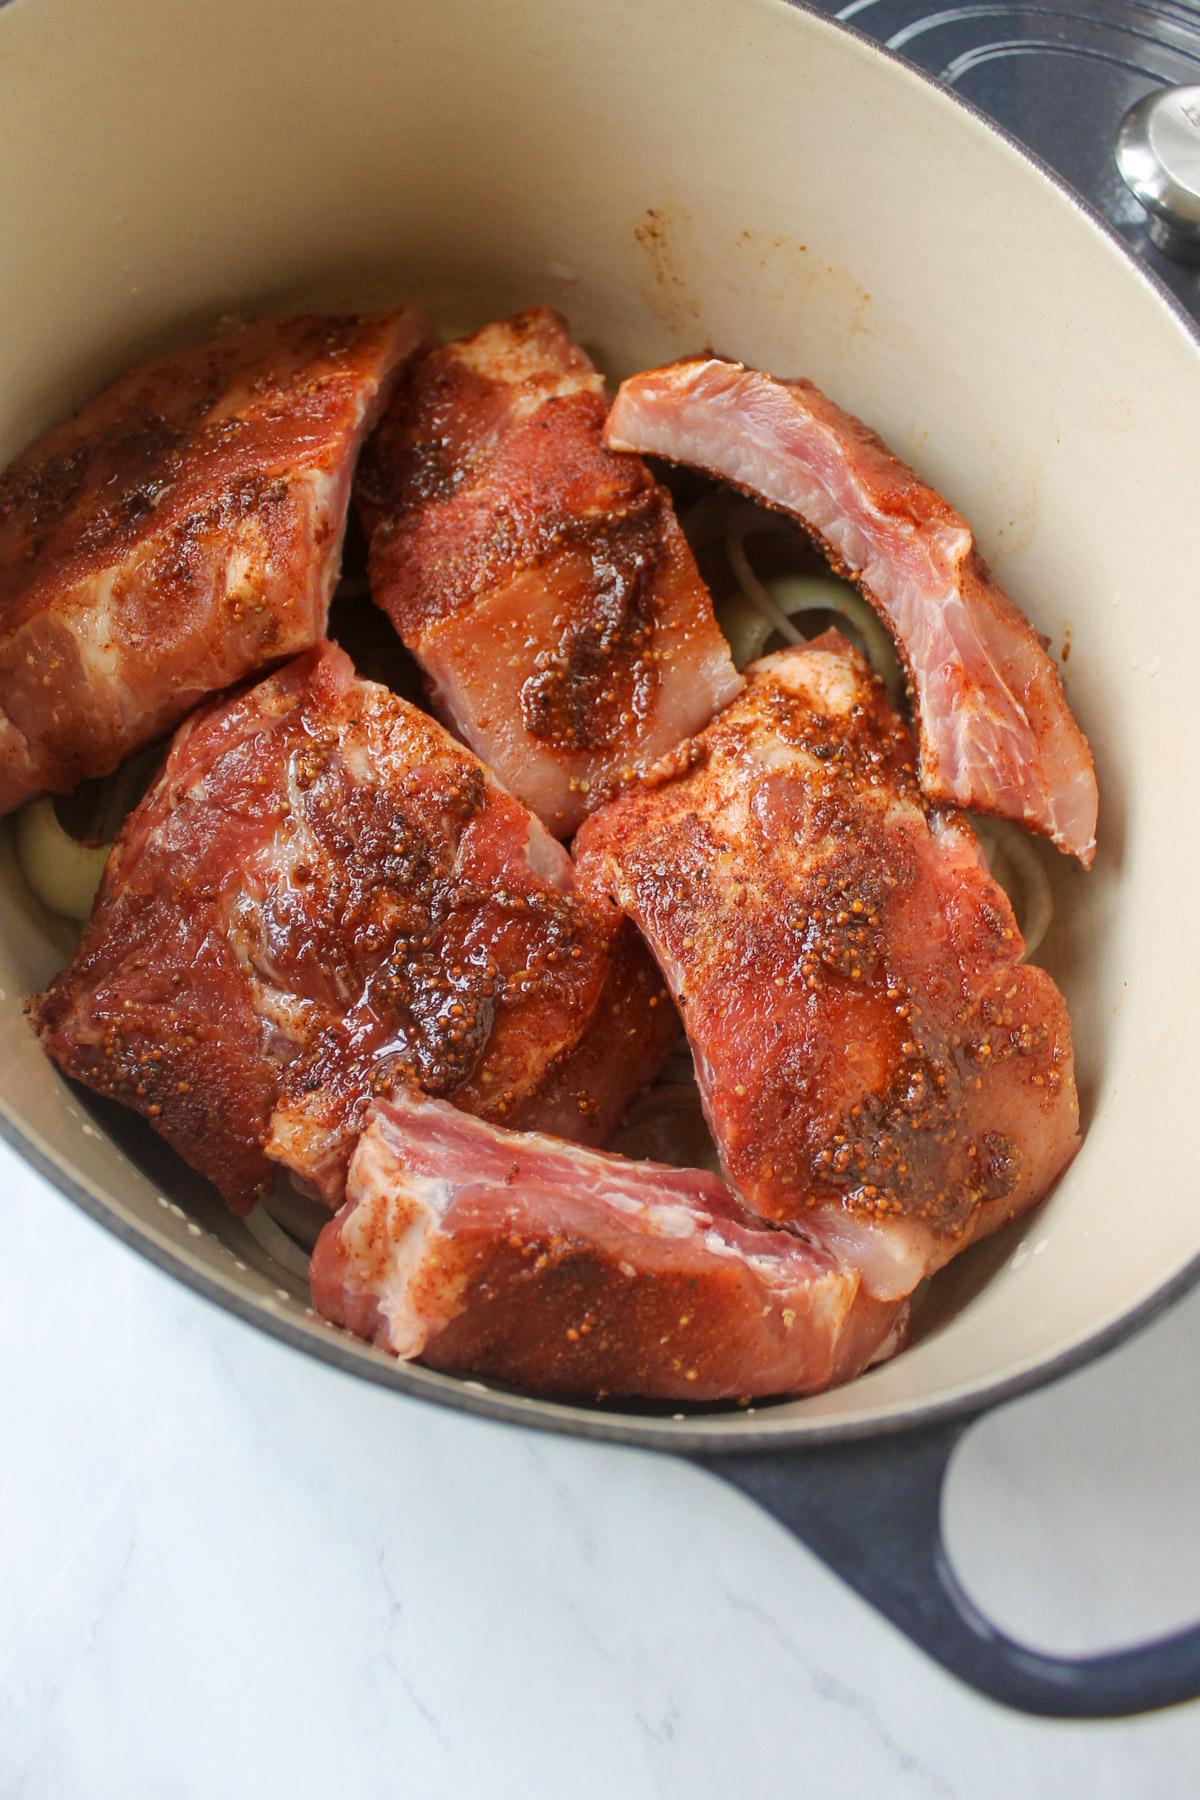 The rack of ribs with the dry rub, cut into large pieces and arranged in a Dutch oven, ready to bake.